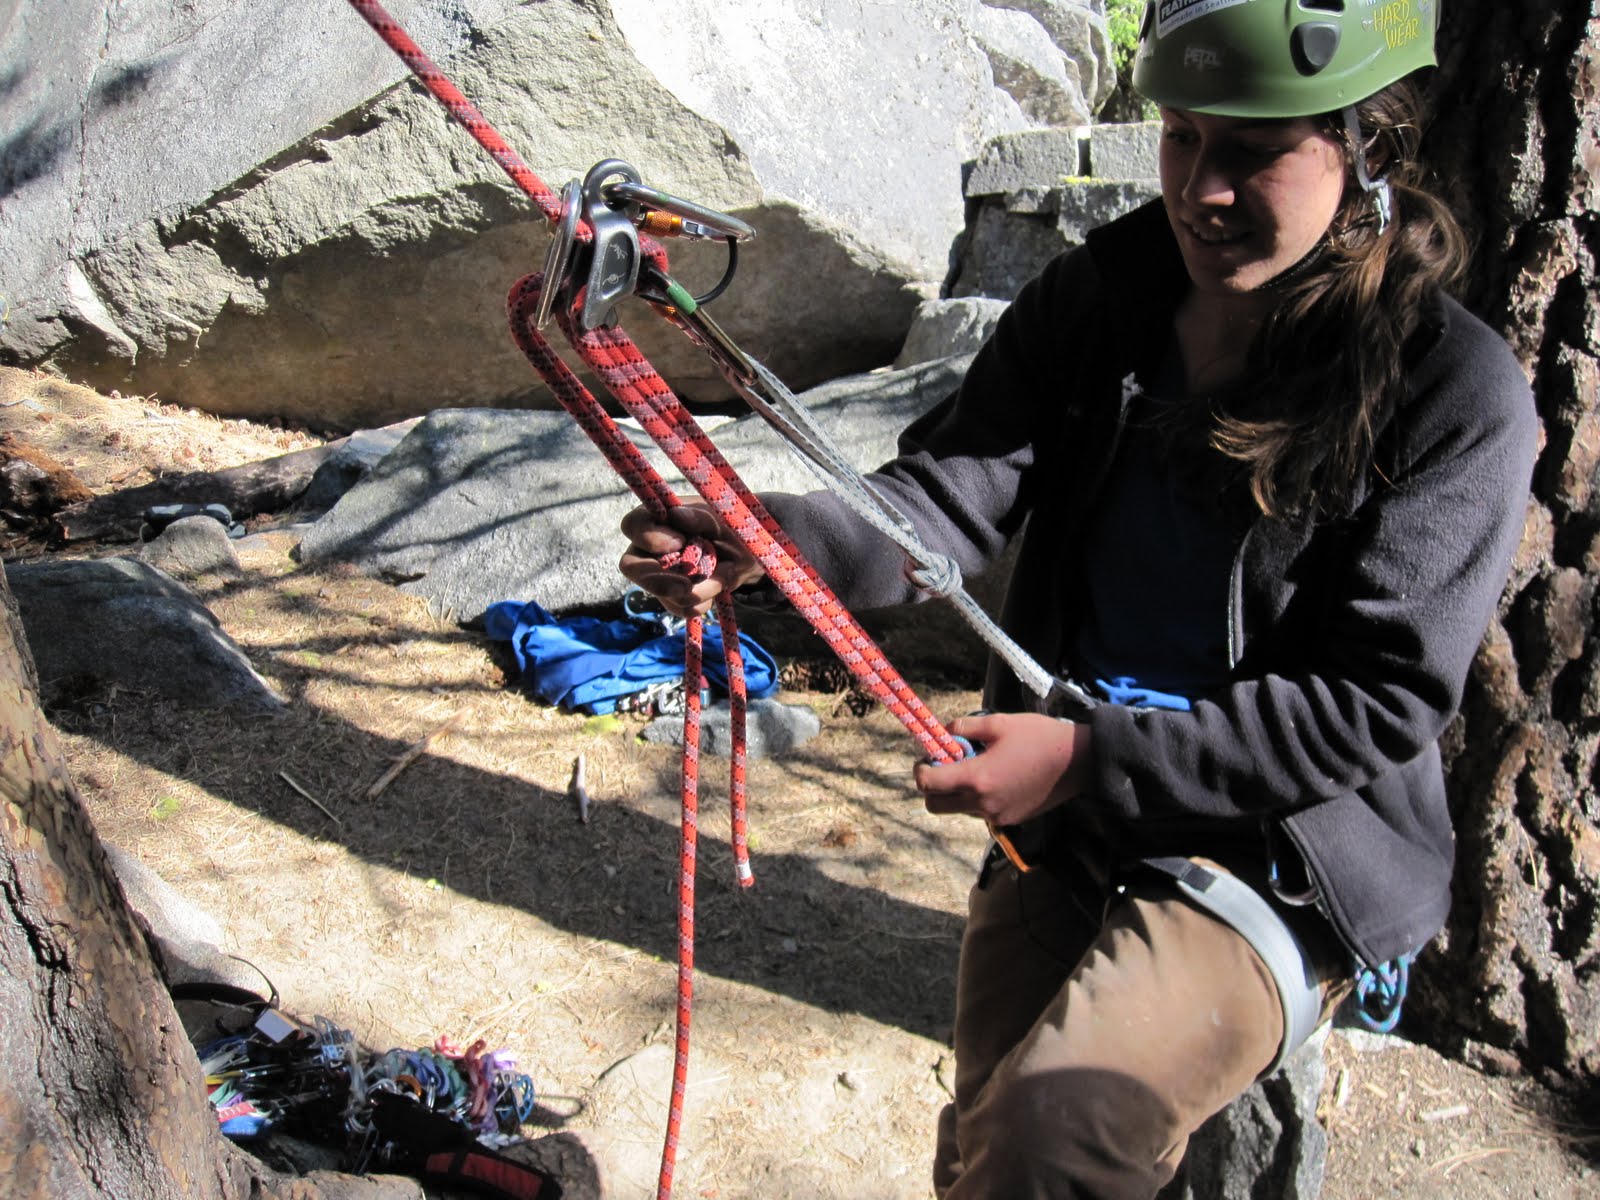 American Alpine Institute - Climbing Blog: Rappelling on Skinny Ropes